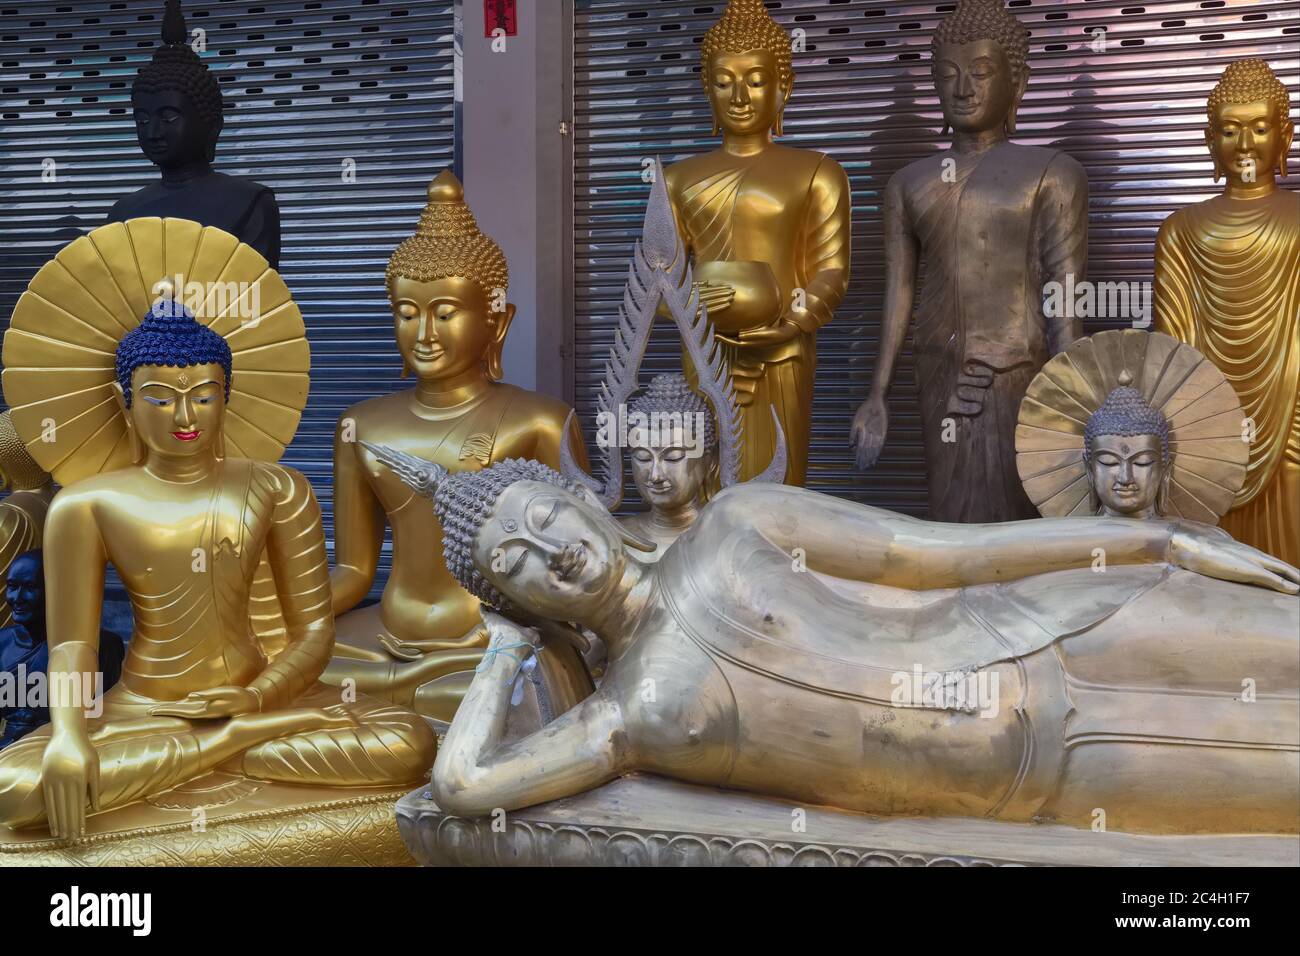 Buddha statues of various types - one reclining Buddha - in front of a factory outlet for religious objects in Bamrung Muang Road, Bangkok, Thailand Stock Photo